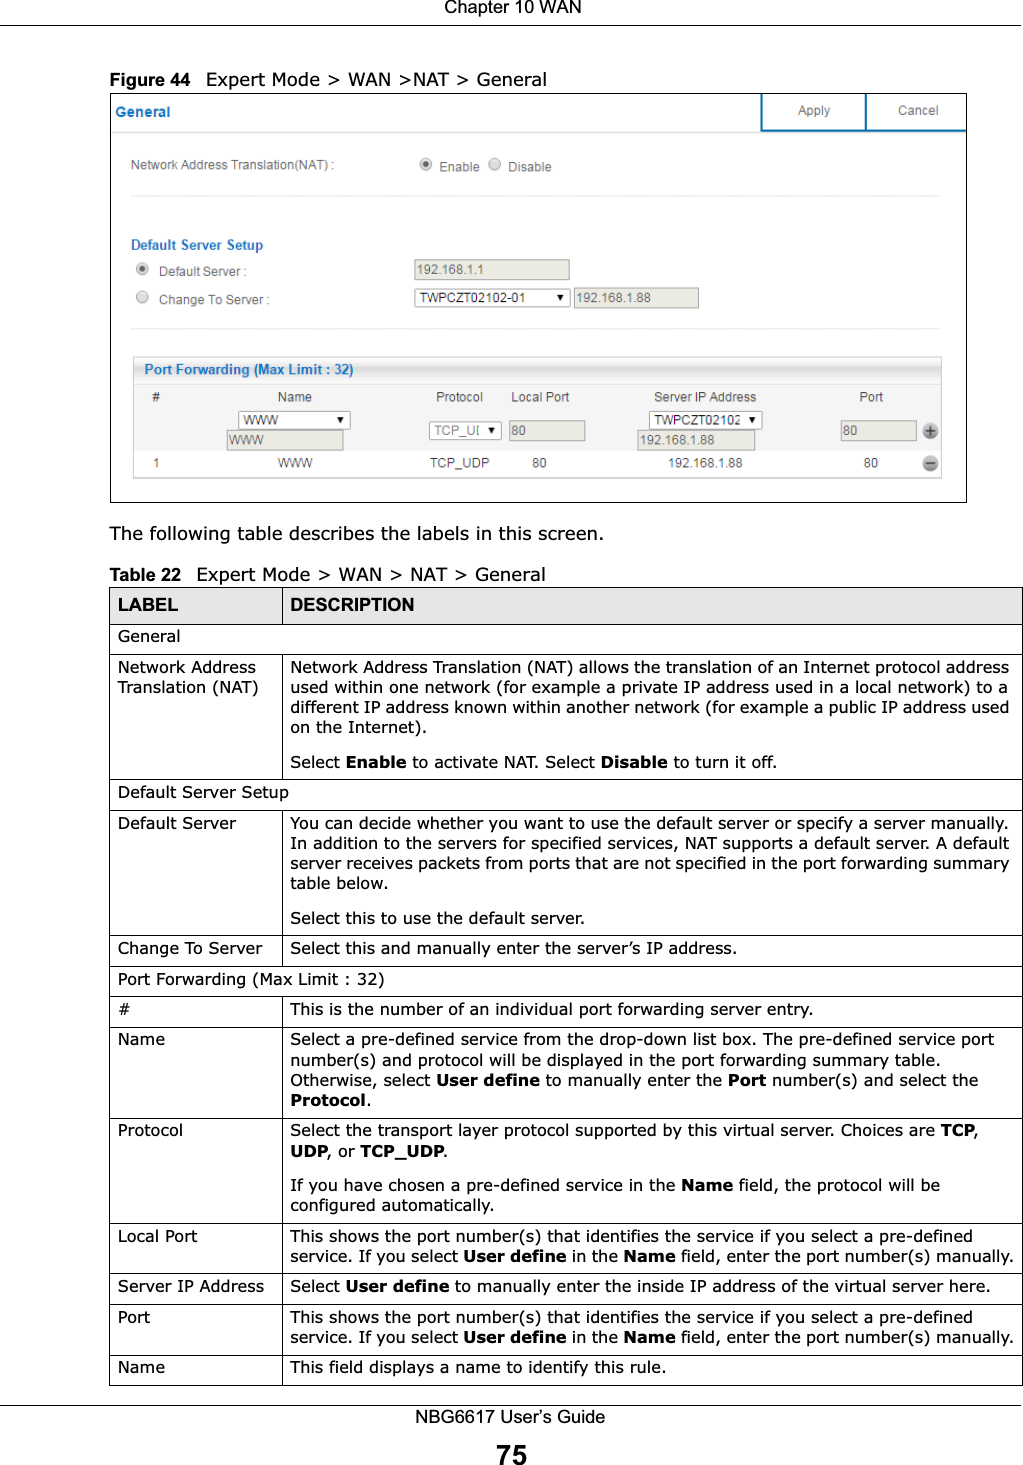  Chapter 10 WANNBG6617 User’s Guide75Figure 44   Expert Mode &gt; WAN &gt;NAT &gt; General The following table describes the labels in this screen.Table 22   Expert Mode &gt; WAN &gt; NAT &gt; GeneralLABEL DESCRIPTIONGeneralNetwork Address Translation (NAT)Network Address Translation (NAT) allows the translation of an Internet protocol address used within one network (for example a private IP address used in a local network) to a different IP address known within another network (for example a public IP address used on the Internet). Select Enable to activate NAT. Select Disable to turn it off.Default Server SetupDefault Server You can decide whether you want to use the default server or specify a server manually. In addition to the servers for specified services, NAT supports a default server. A default server receives packets from ports that are not specified in the port forwarding summary table below. Select this to use the default server. Change To Server  Select this and manually enter the server’s IP address.Port Forwarding (Max Limit : 32)#This is the number of an individual port forwarding server entry.Name Select a pre-defined service from the drop-down list box. The pre-defined service port number(s) and protocol will be displayed in the port forwarding summary table. Otherwise, select User define to manually enter the Port number(s) and select the  Protocol.Protocol Select the transport layer protocol supported by this virtual server. Choices are TCP, UDP, or TCP_UDP. If you have chosen a pre-defined service in the Name field, the protocol will be configured automatically.Local Port This shows the port number(s) that identifies the service if you select a pre-defined service. If you select User define in the Name field, enter the port number(s) manually.Server IP Address Select User define to manually enter the inside IP address of the virtual server here.Port This shows the port number(s) that identifies the service if you select a pre-defined service. If you select User define in the Name field, enter the port number(s) manually.Name This field displays a name to identify this rule.